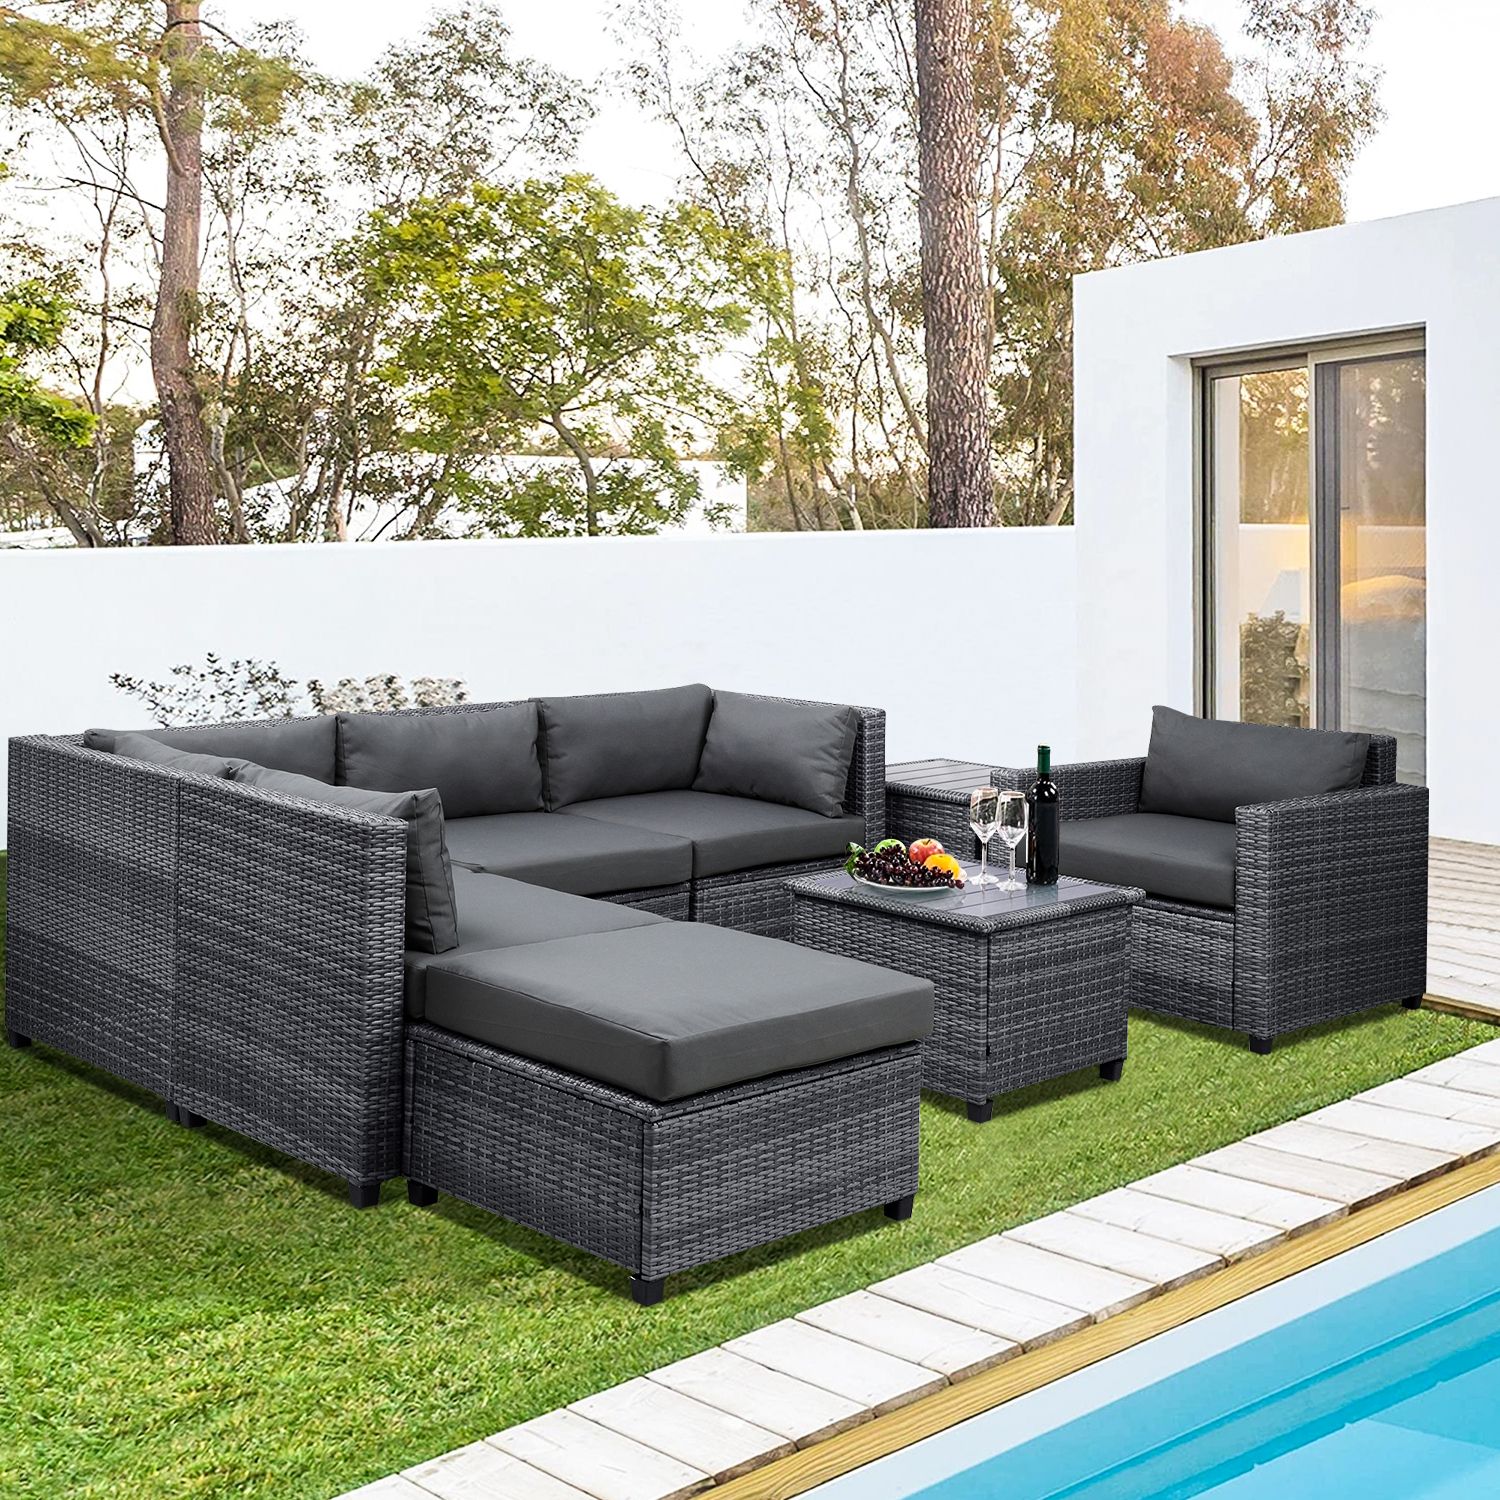 Popular Sectional Patio Chairs & Seating Sofa Furniture For Living Room Outdoor With Gray All Weather Outdoor Seating Patio Sets (View 7 of 15)